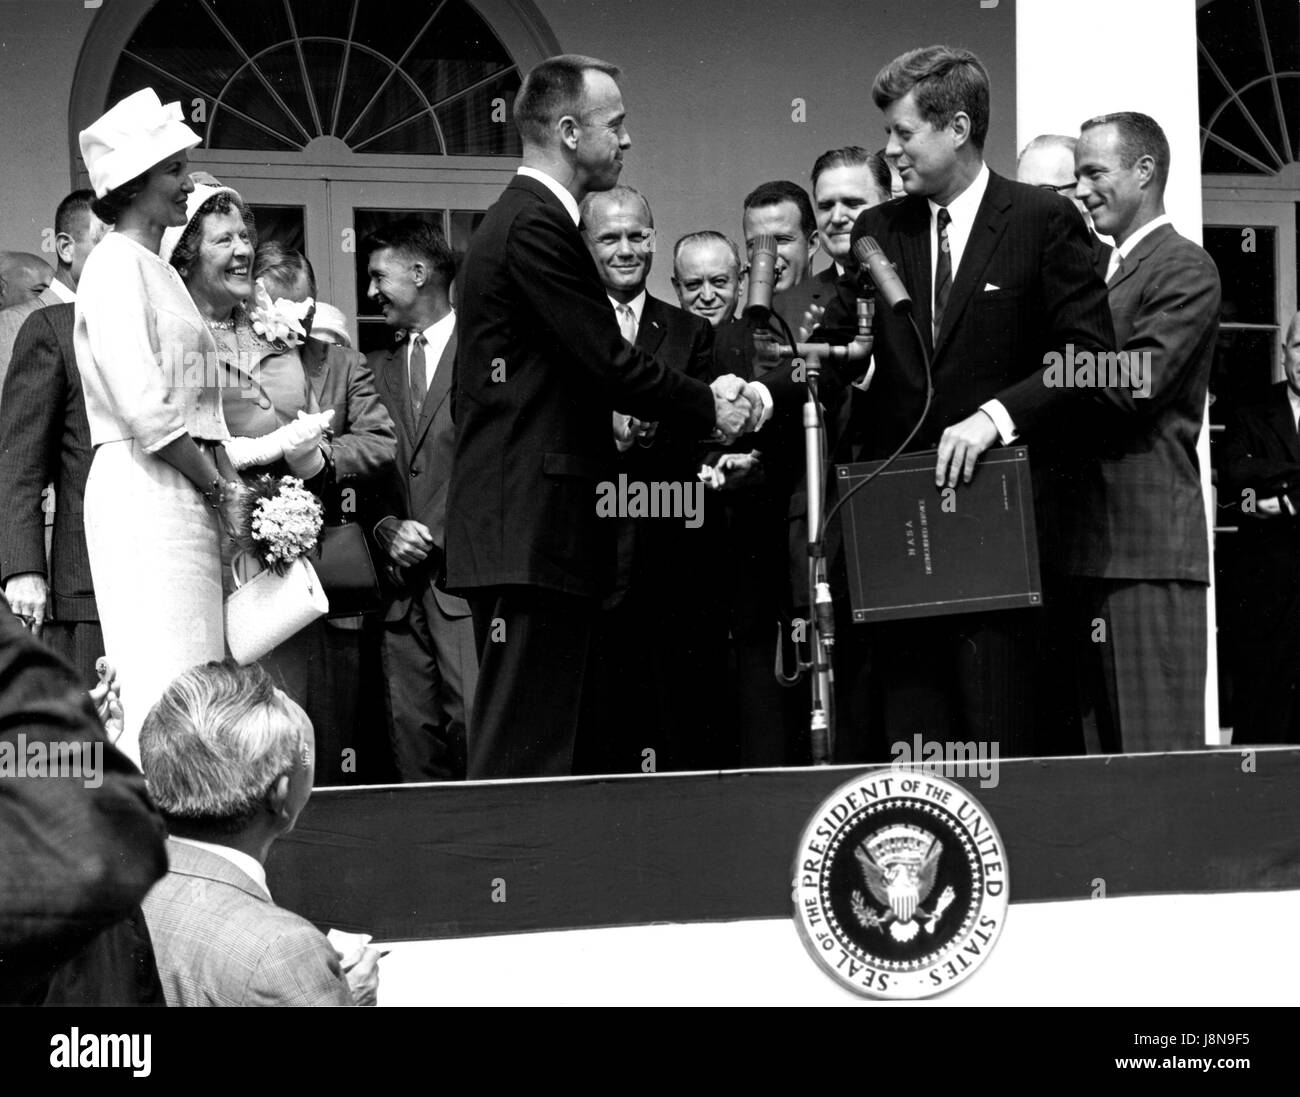 United States President John F. Kennedy congratulates astronaut Alan B. Shepard, Jr., the first American in space, on his historic May 5th, 1961 ride in the Freedom 7 spacecraft and presents him with the National Aeronautics and Space Administration (NASA) Distinguished Service Award, in Washington, D.C. on May 6, 1961.  Shepard's wife, Louise (left in white dress and hat), and his mother were in attendance as well as the other six Mercury astronauts, including Colonel John H. Glenn, Jr. and other NASA officals, some visible in the background..Credit: NASA via CNP /MediaPunch Stock Photo